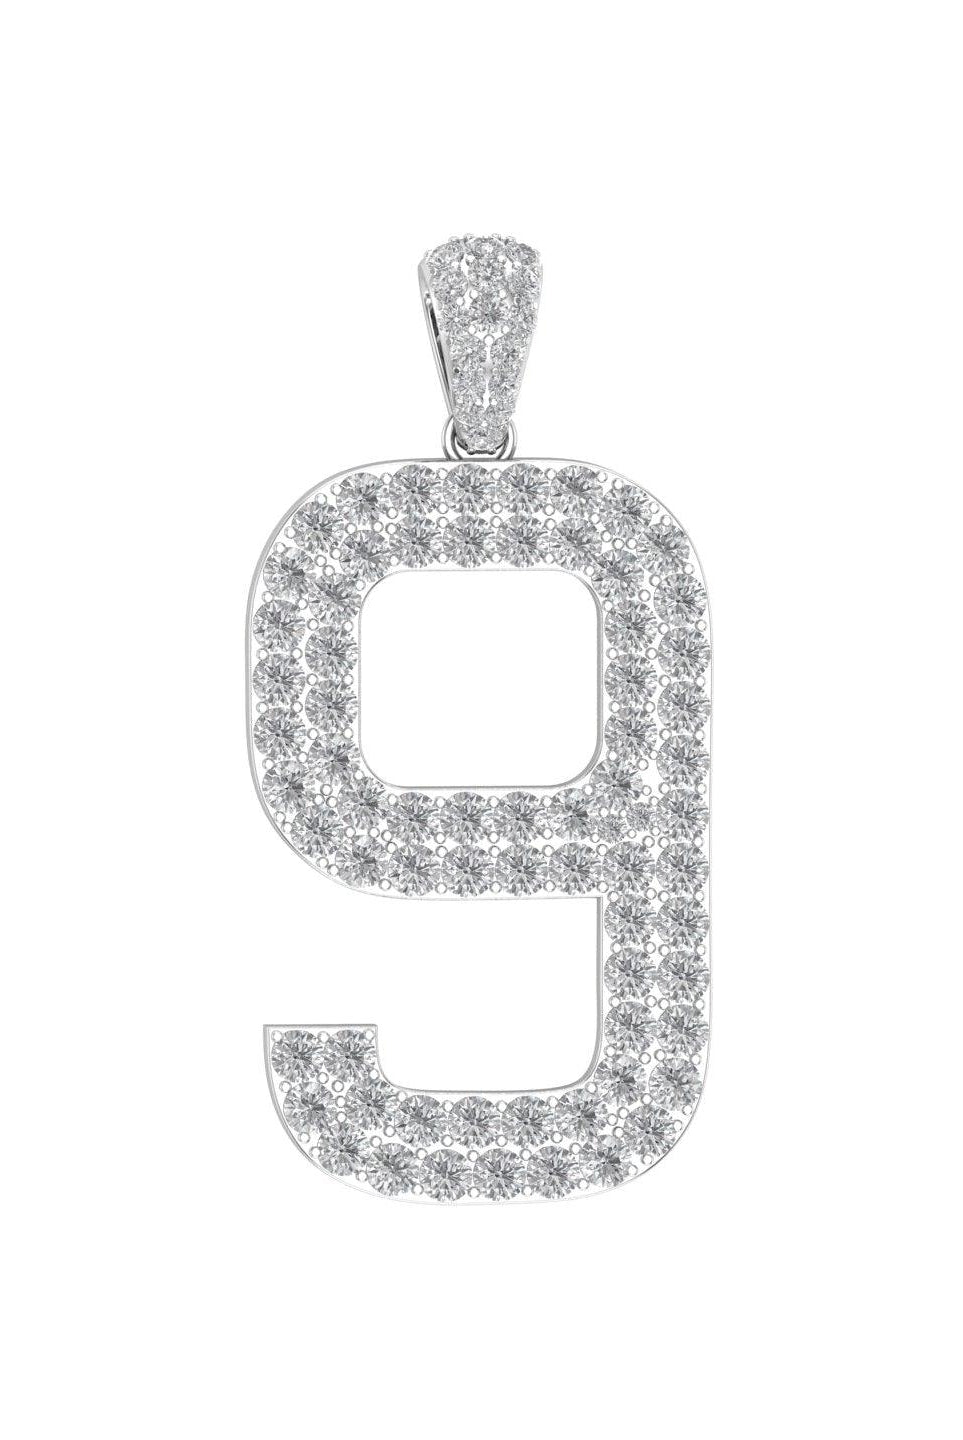 White Gold Color Pendant in the Shape of 9 Made of 925 Sterling Silver Material with 20 Inch Long Silver Chain